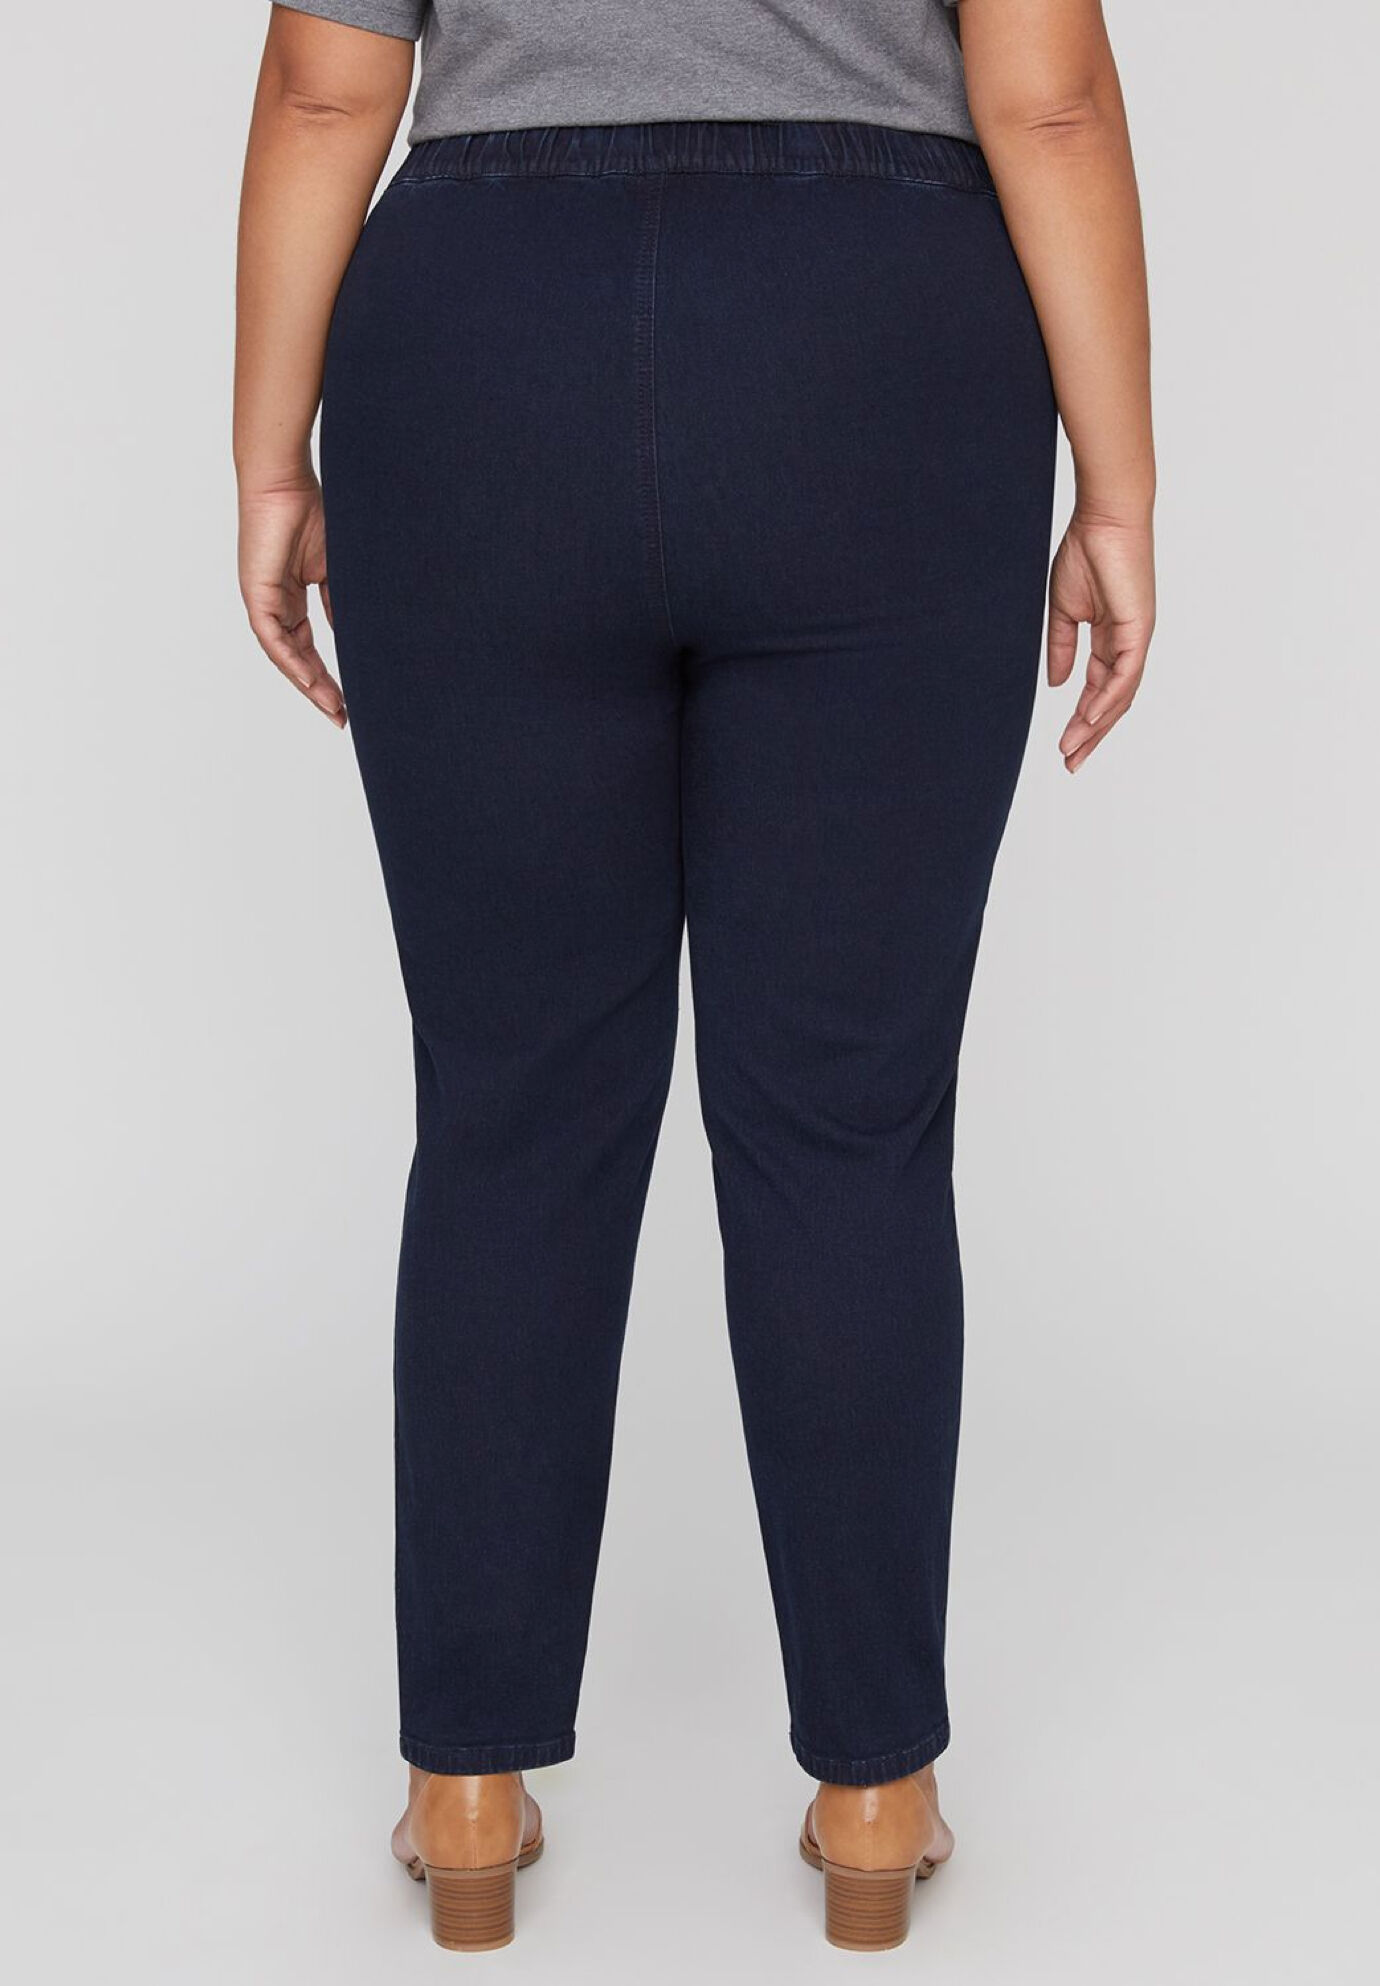  Catherines Womens Plus Size Tall Suprema Pant - 3XWT, Navy  Blue